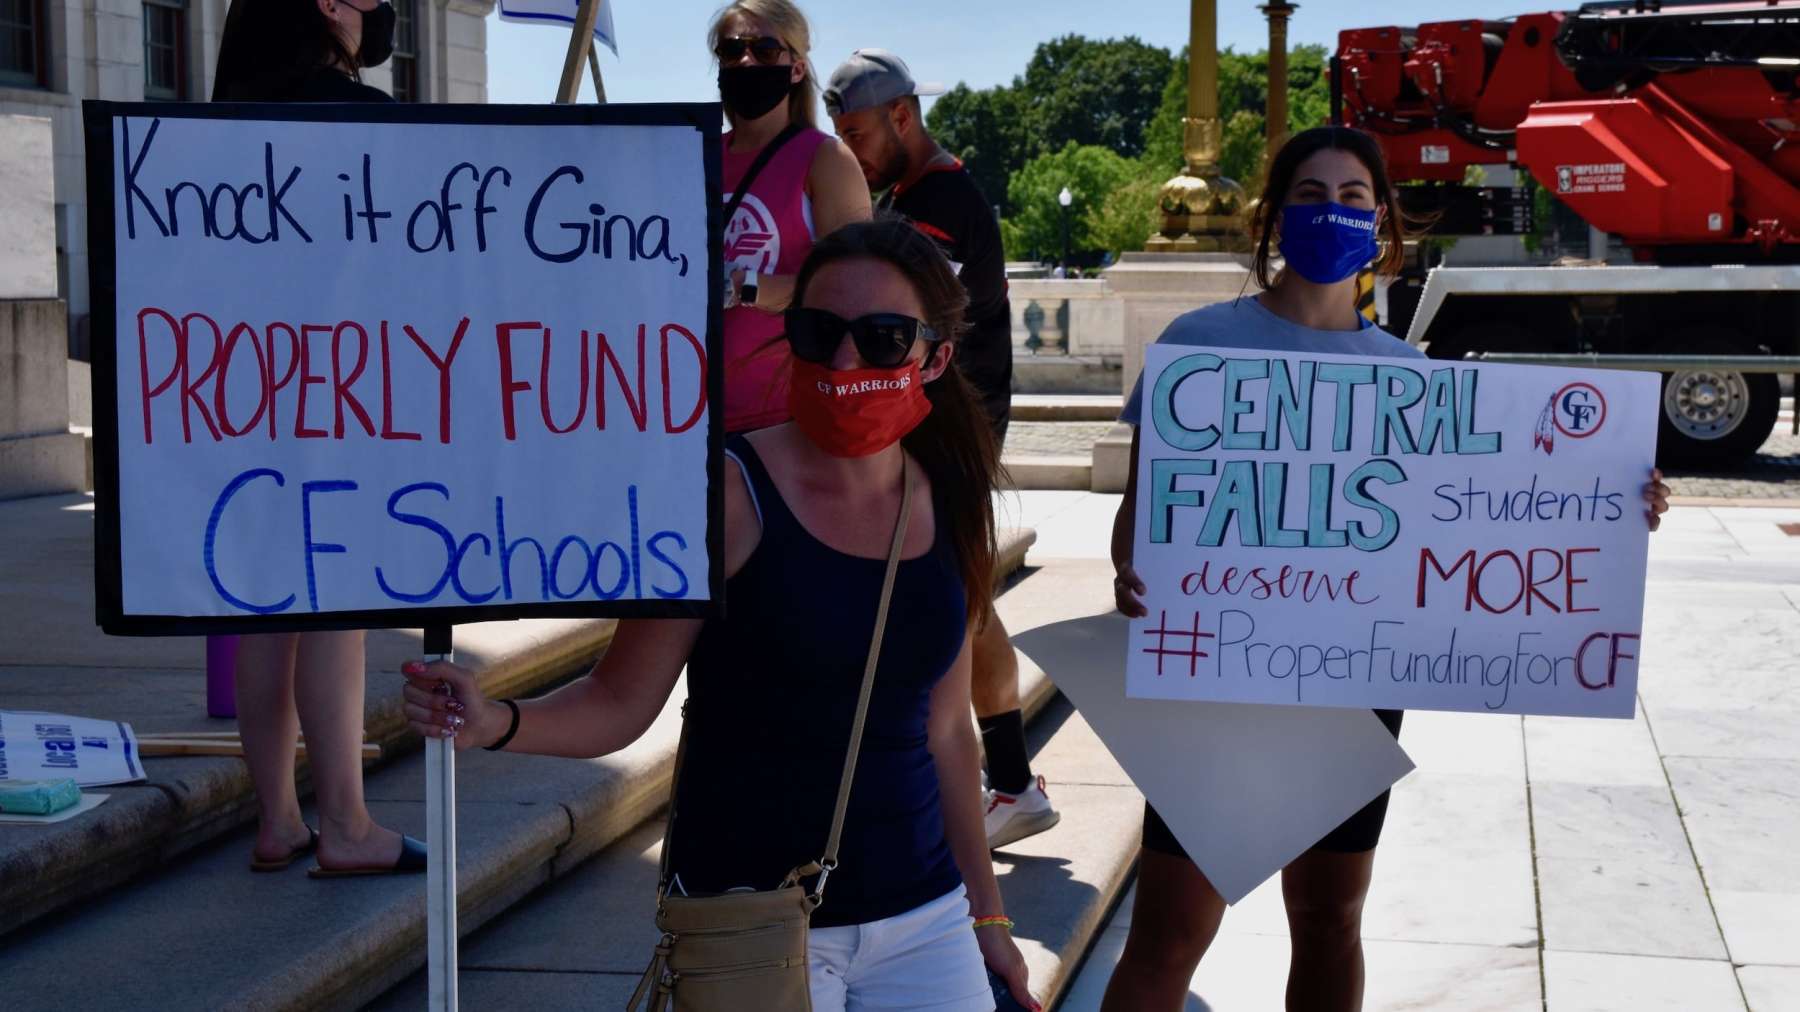 Rhode Island News: Education is Freedom! The Central Falls Rally to fund the schools